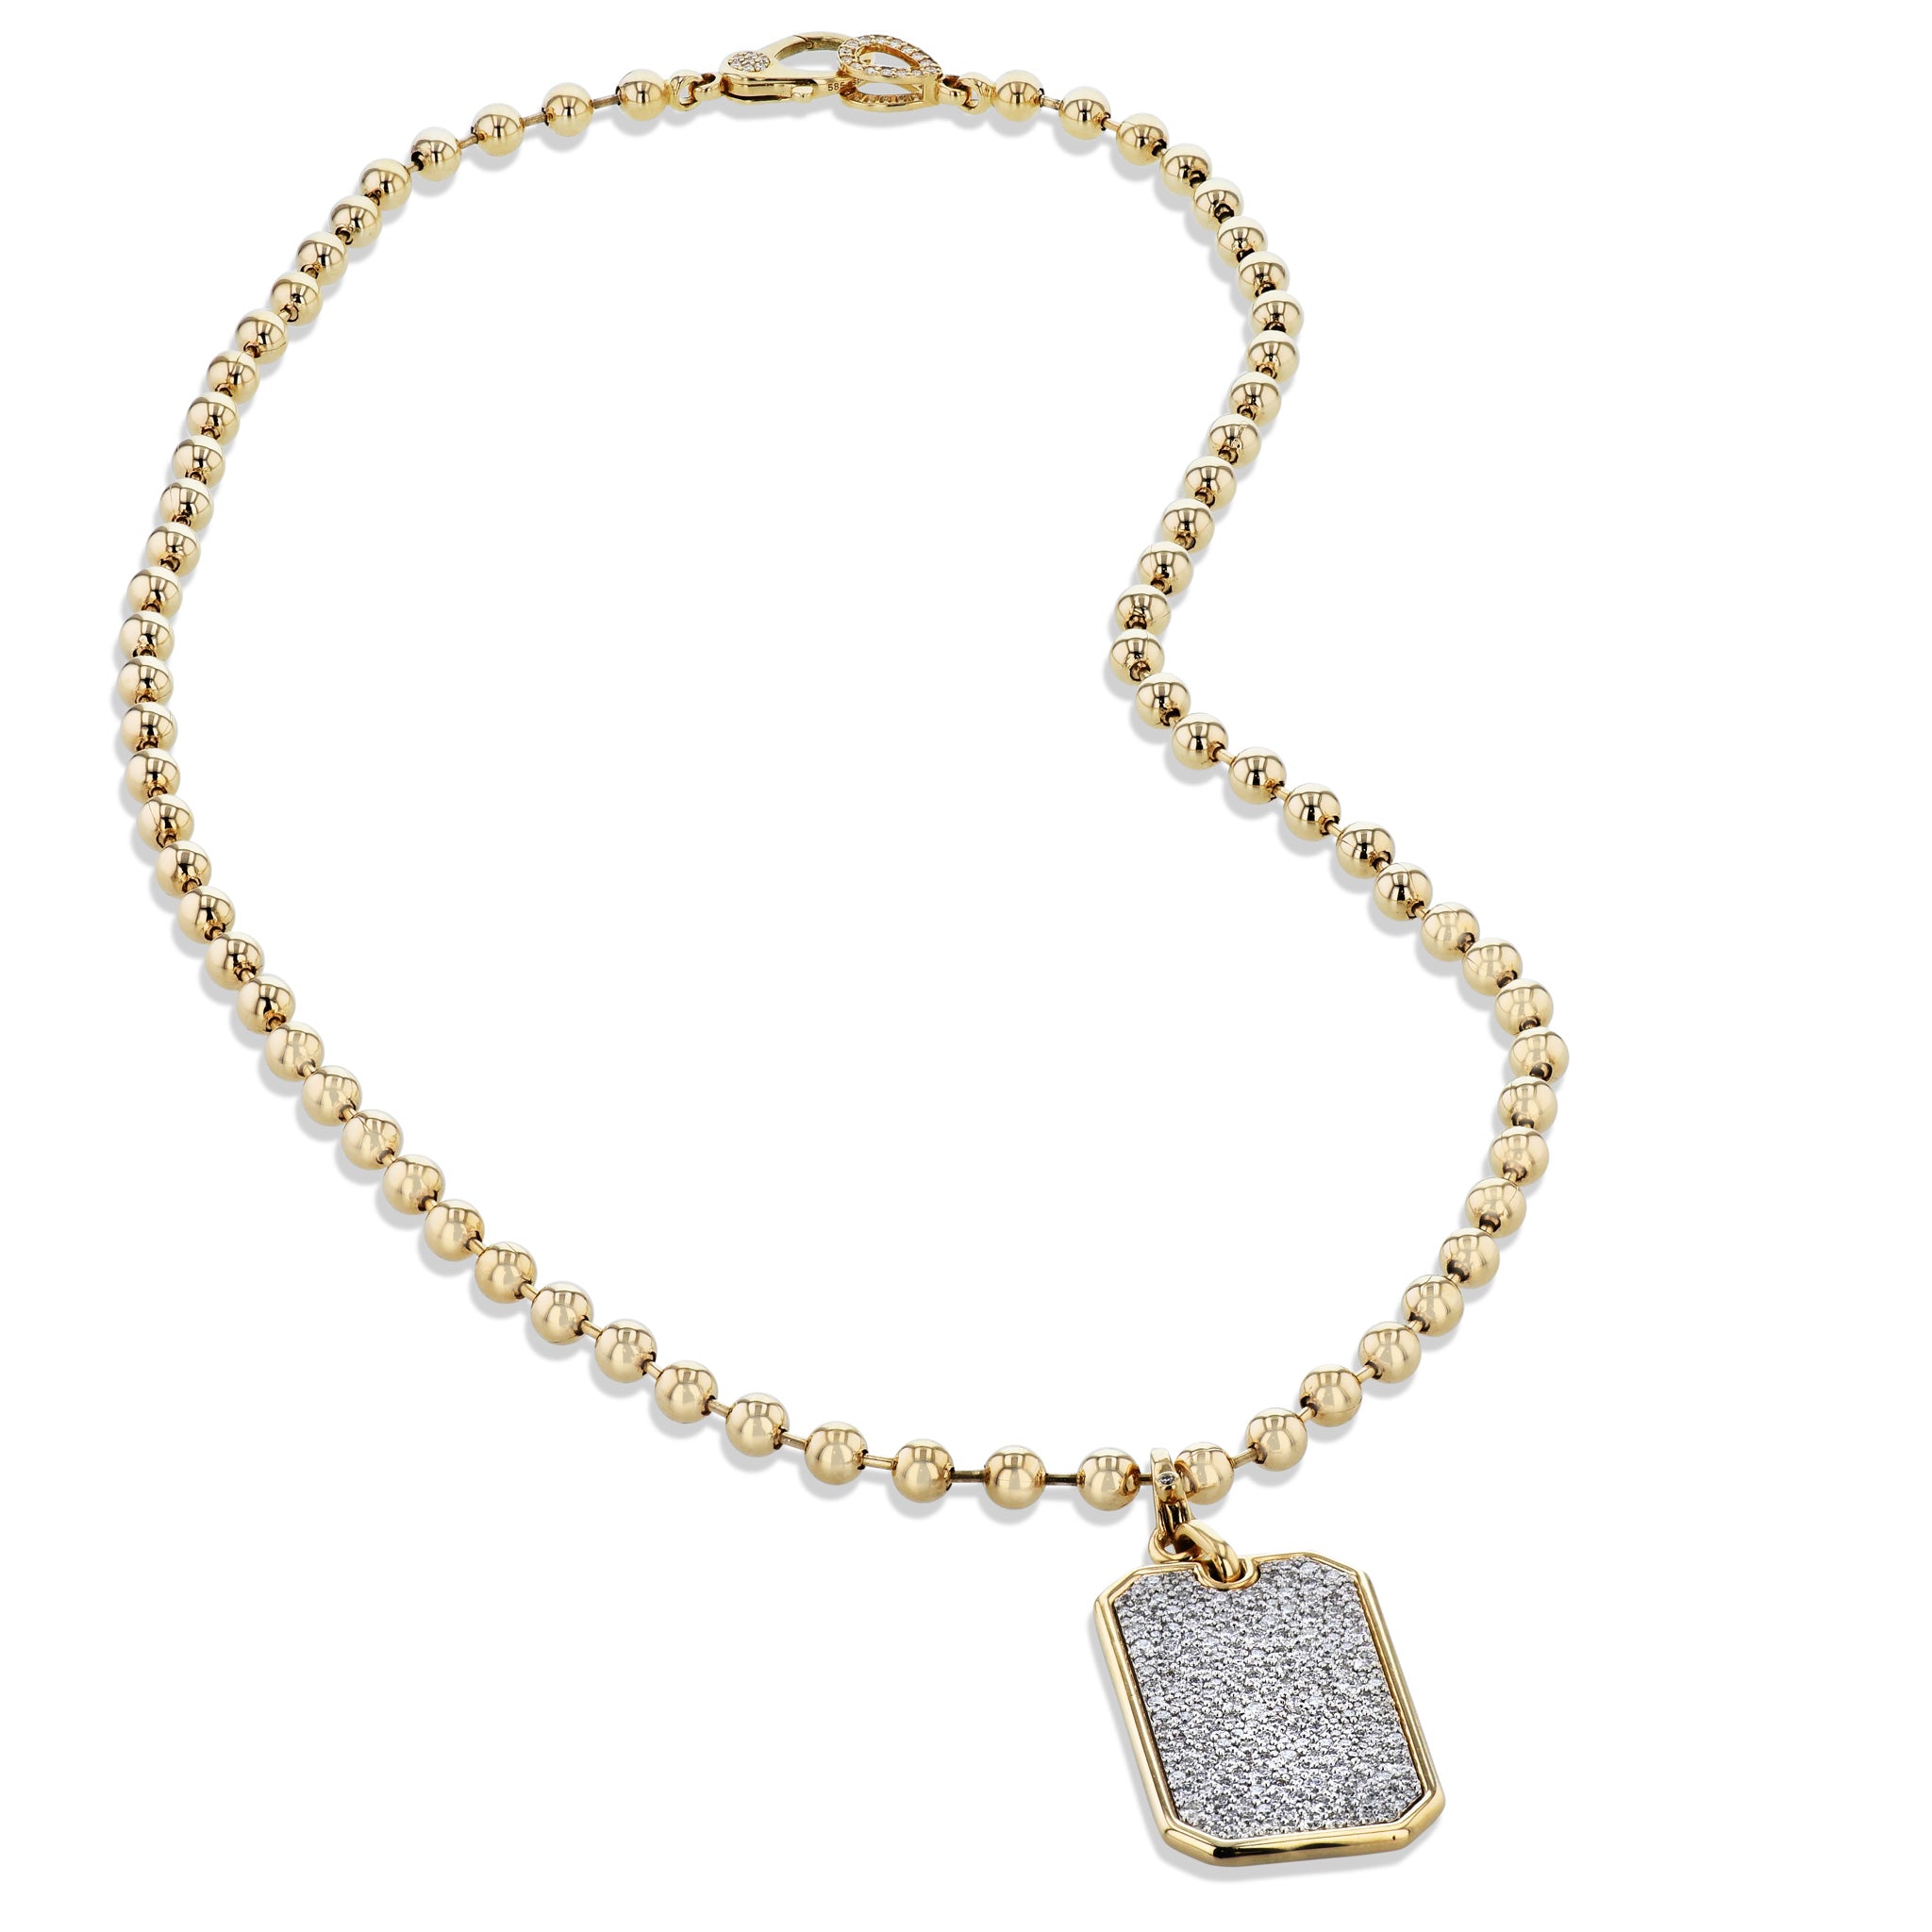 Yellow Gold Diamond Rectangular Tag Necklace Pendant Necklaces Curated by H